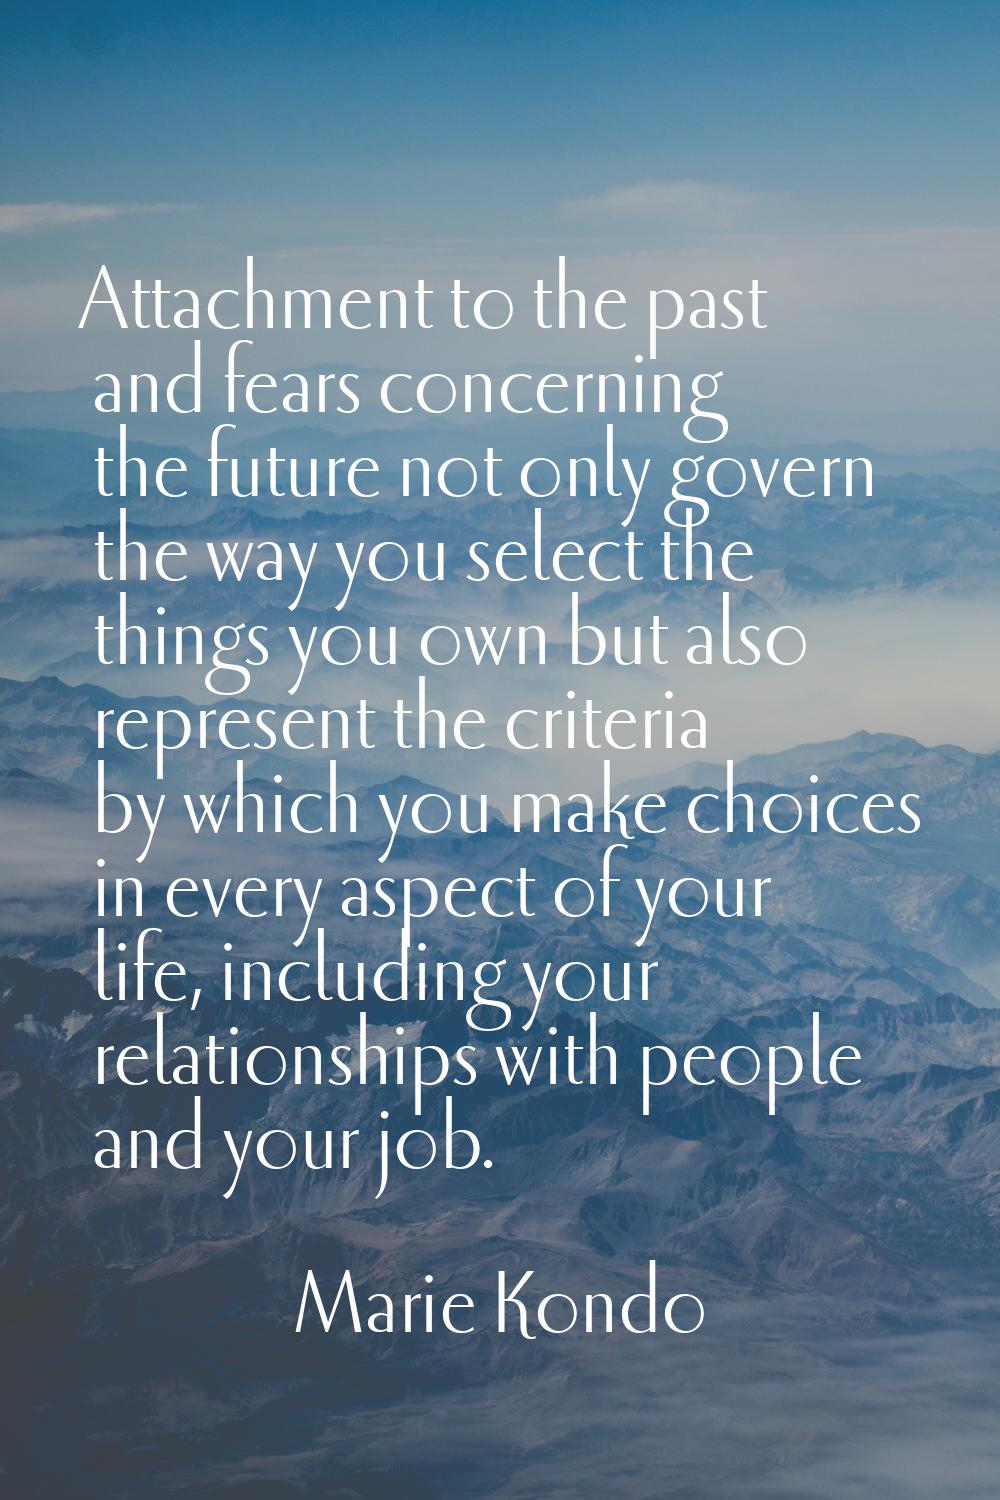 Attachment to the past and fears concerning the future not only govern the way you select the thing